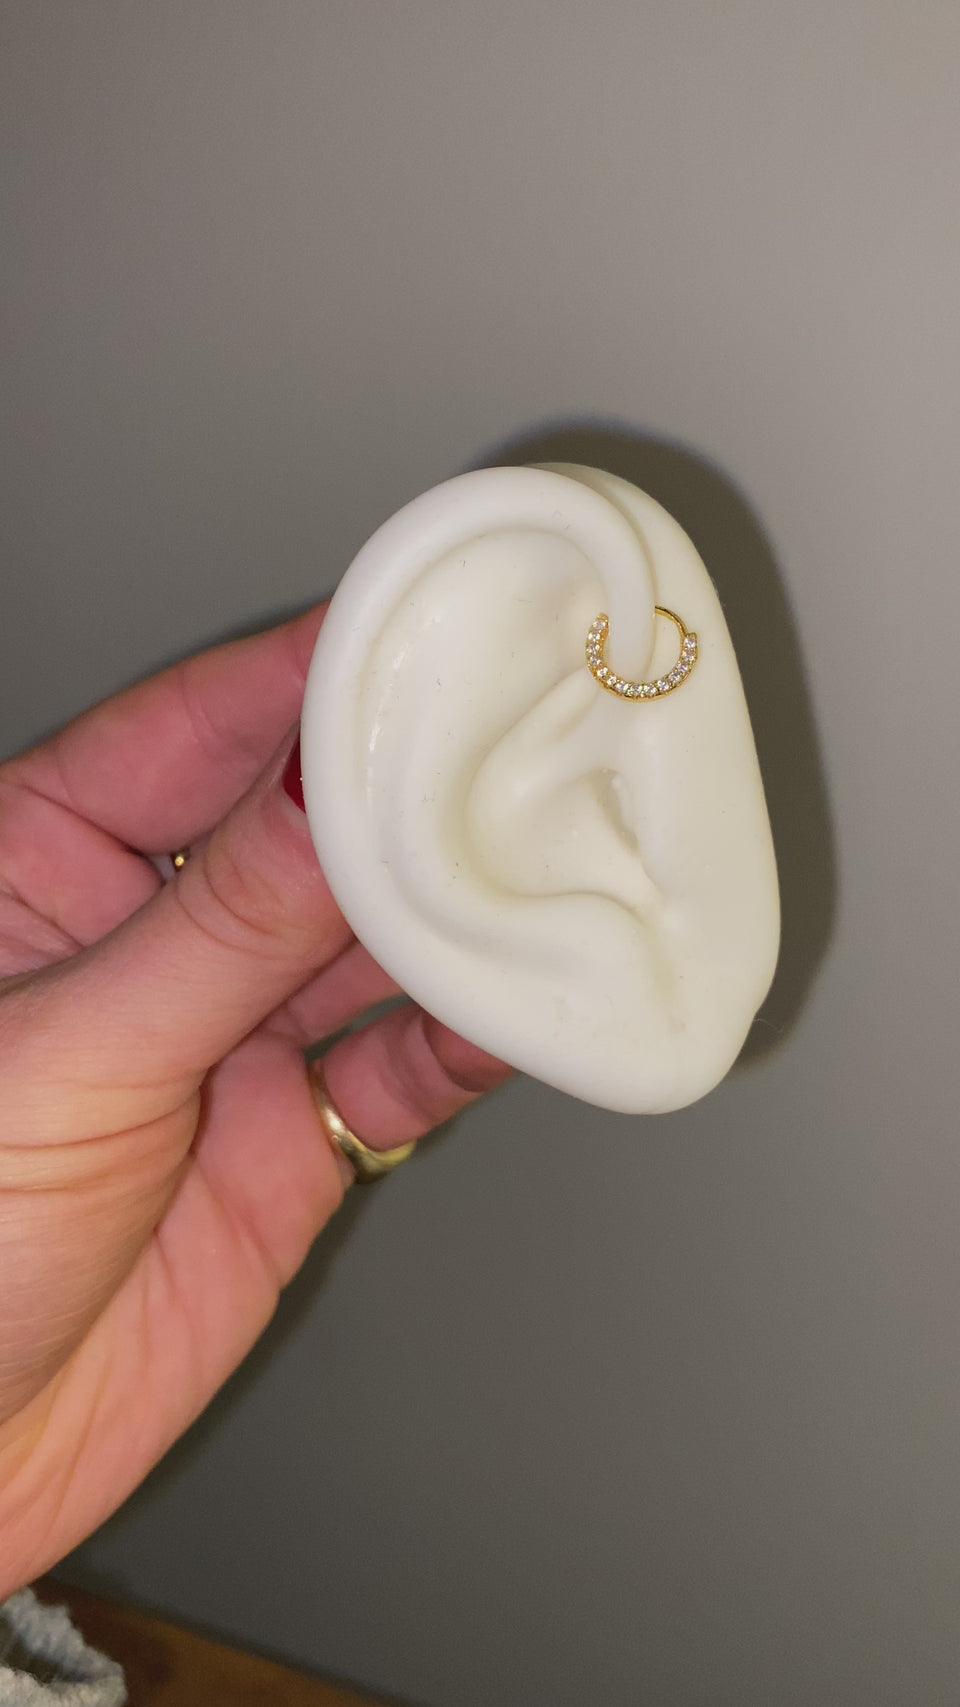 daith ring, cartilage earring, body jewelry, unique, piercings, gold, silver, stainless steel, helix, tragus, fashionable, trendy